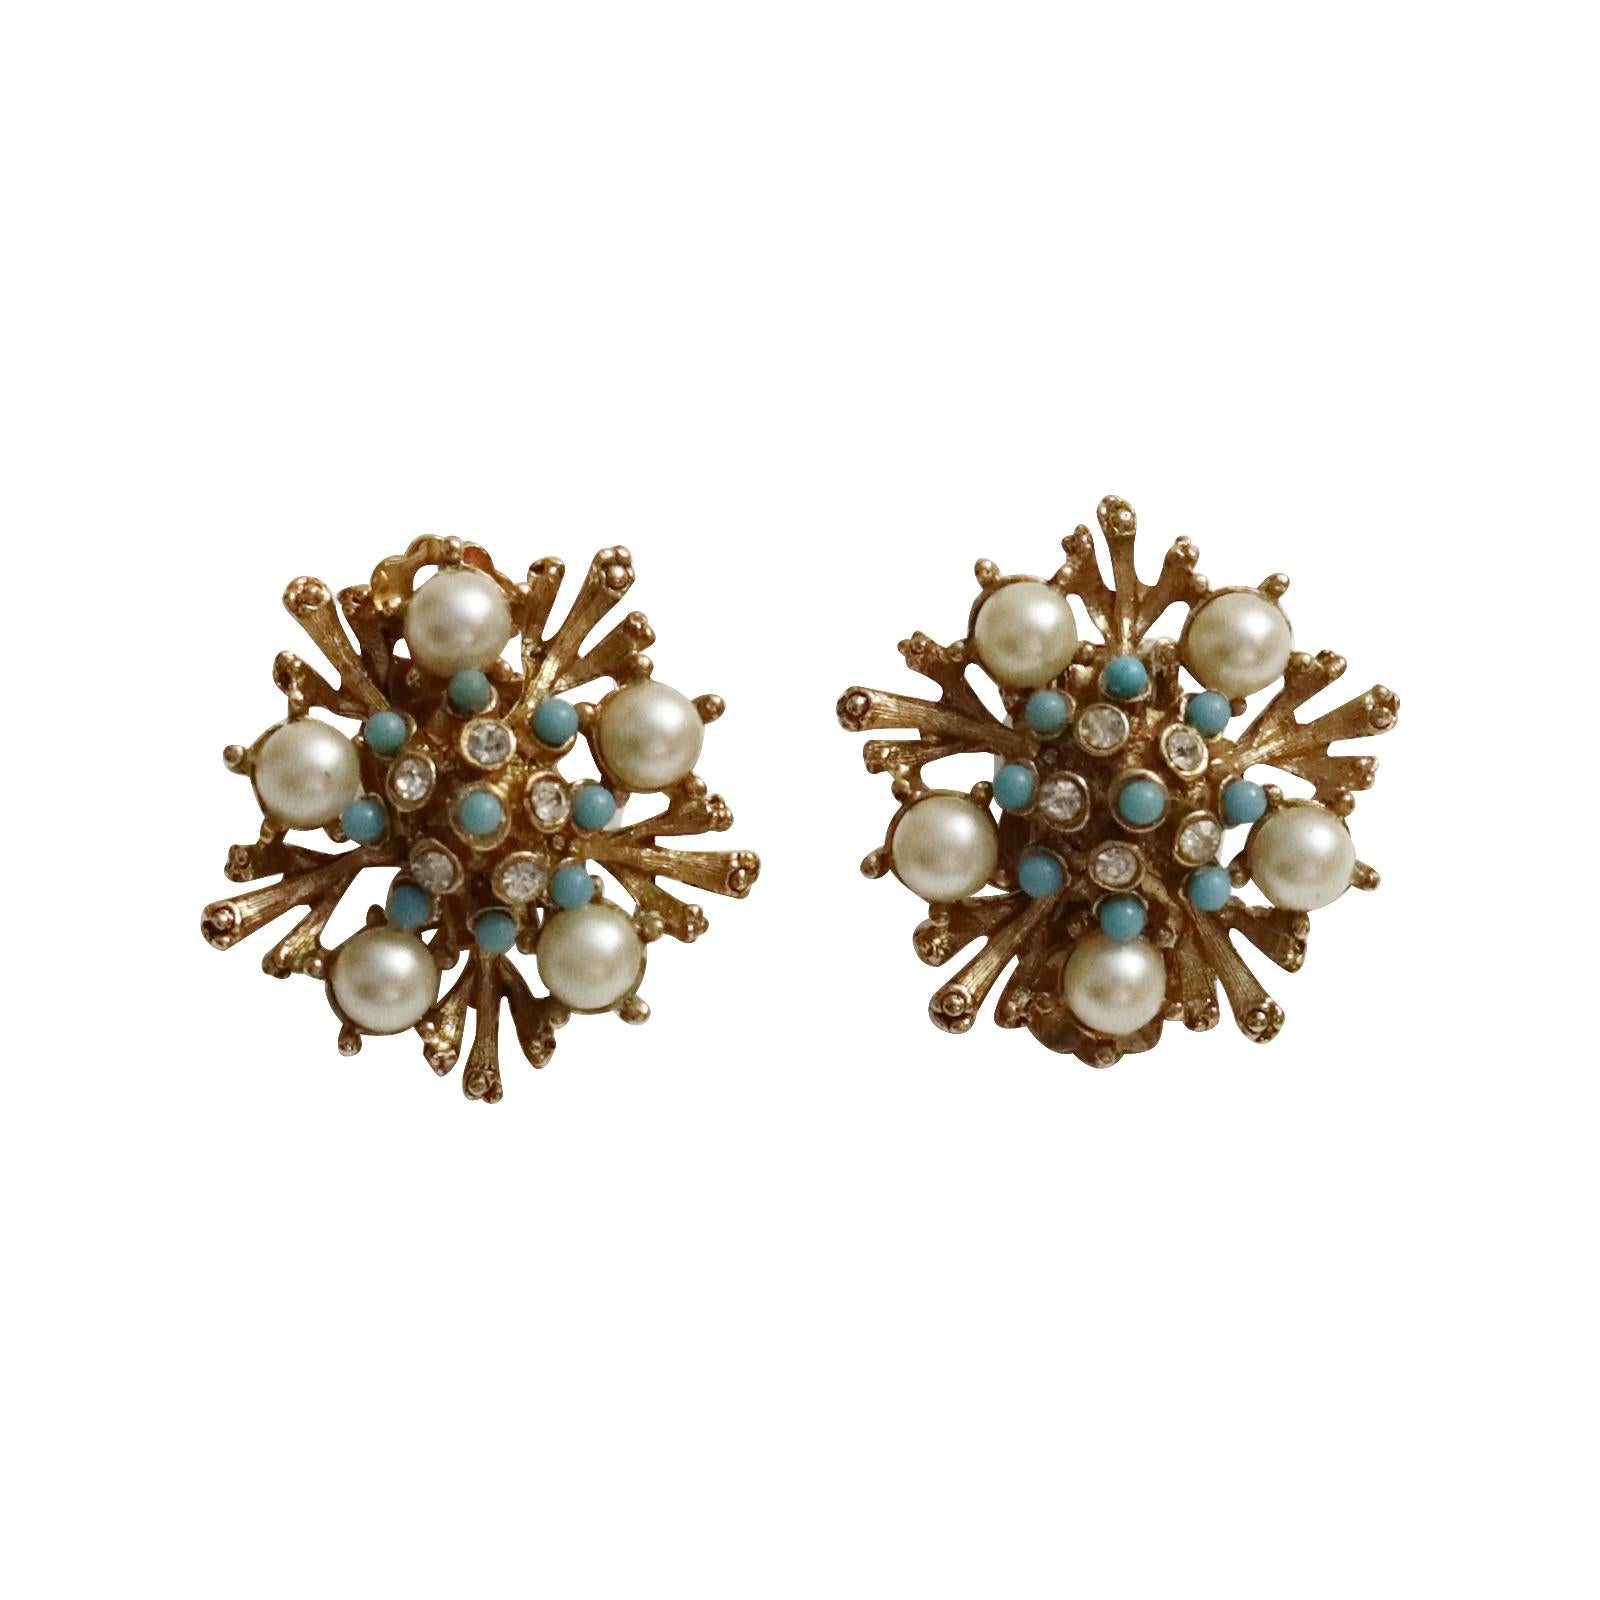 Vintage Gold  Tone Diamante and Faux Turquoise Earrings Circa 1960s. These are so chic and look like fine.   There is a lot of thought that went into the construction of making these.  They start at the very end with diamante set in gold tone which